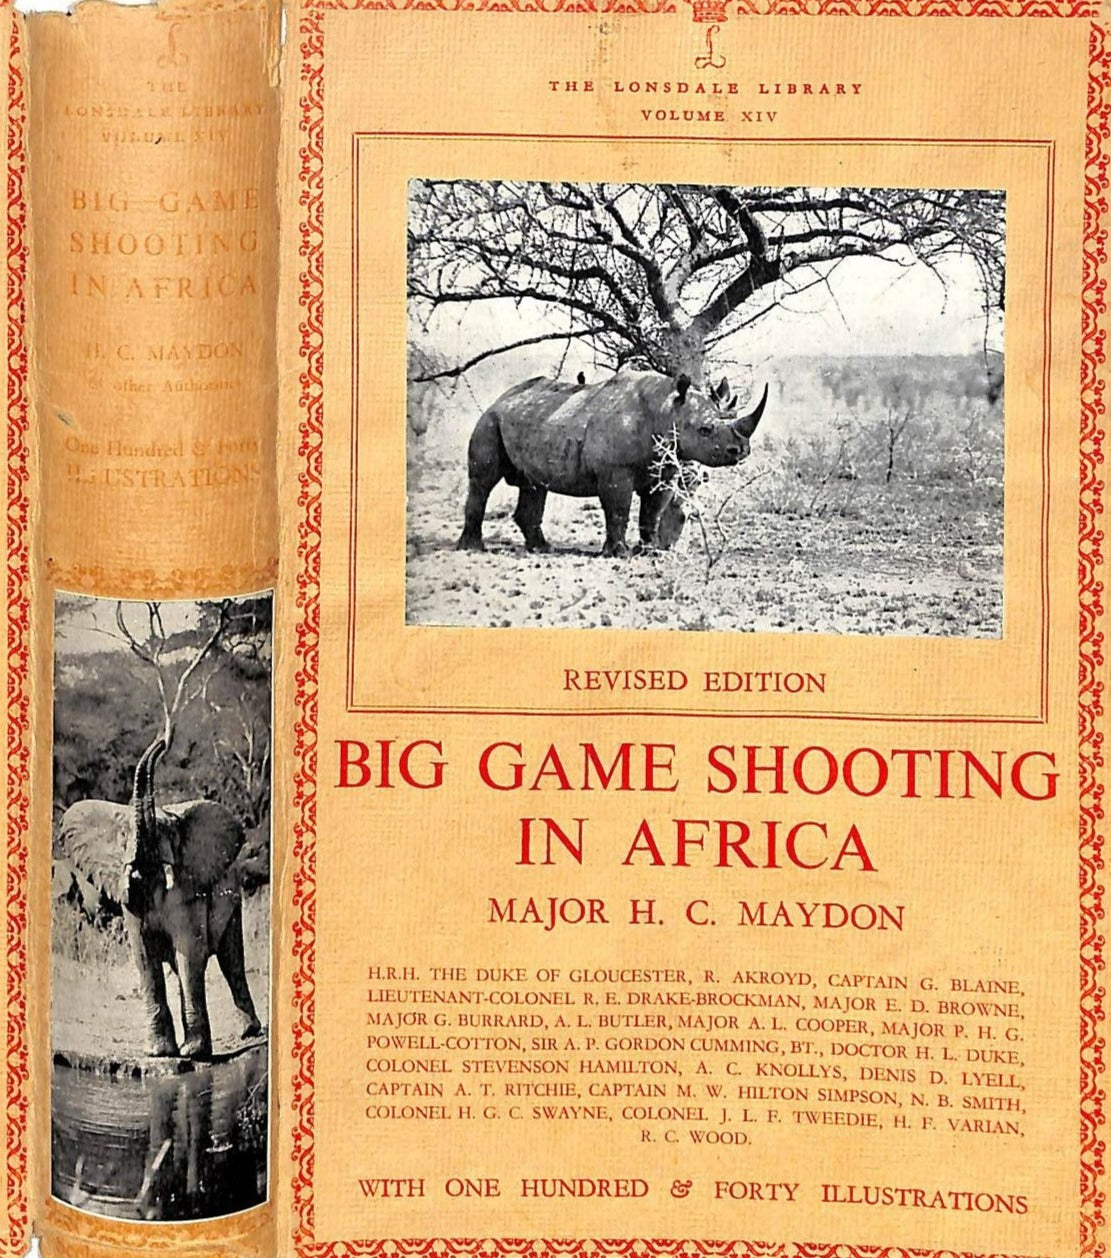 "Big Game Shooting In Africa" 1957 MAYDON, Major H.C. (SOLD)